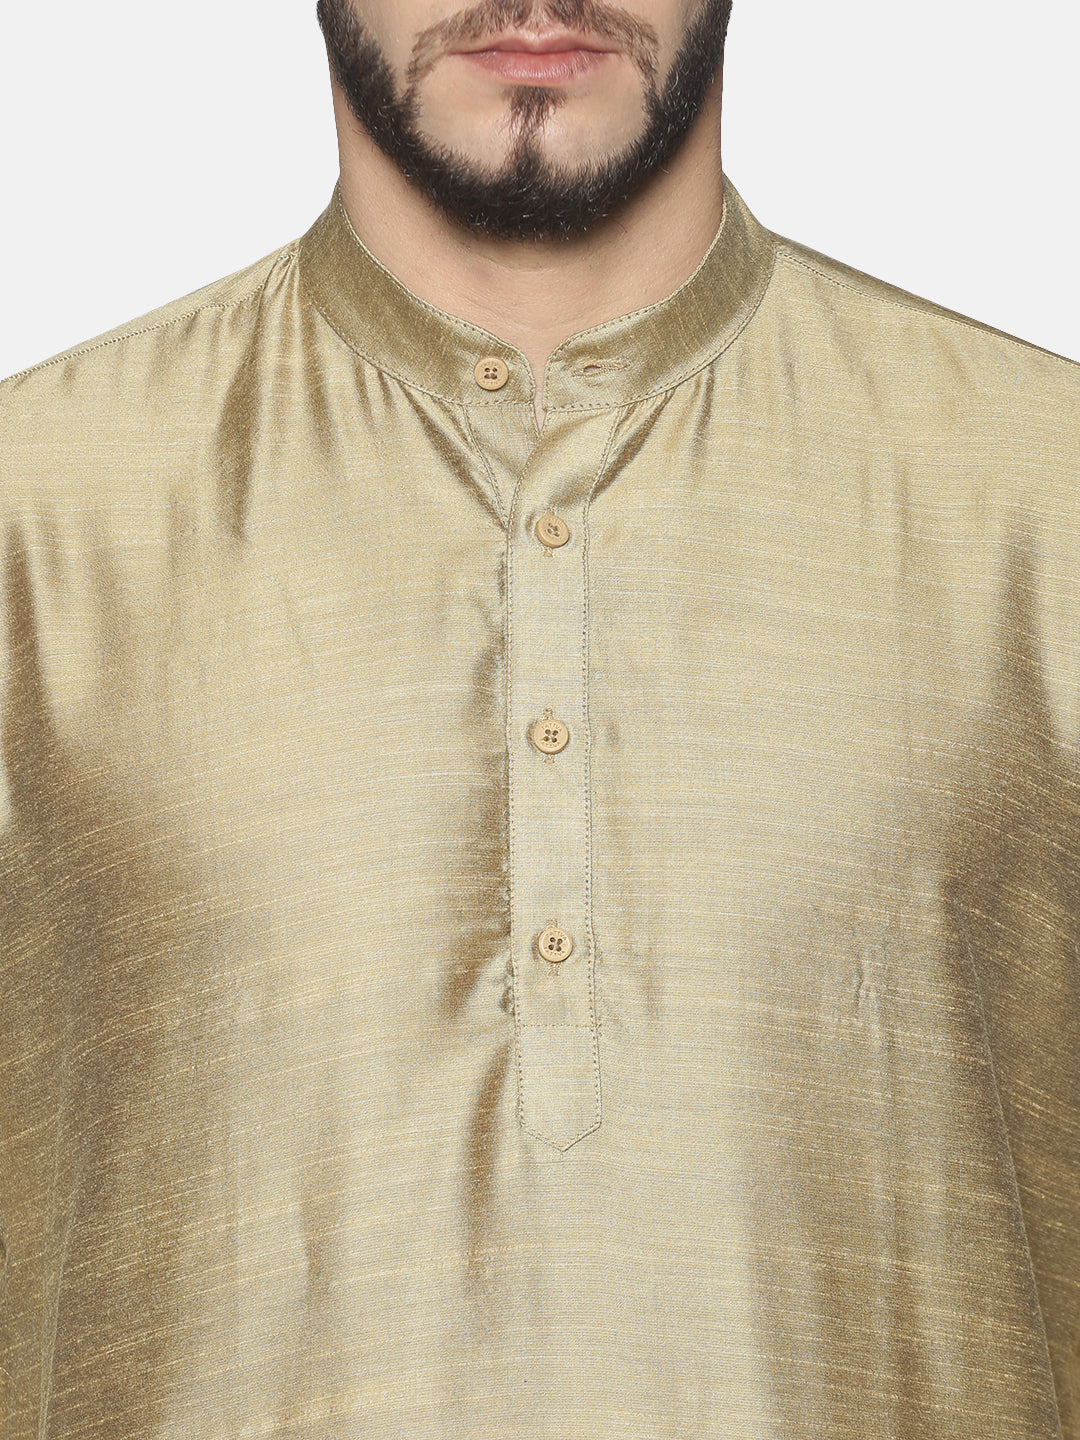 Gold-Toned Cotton Solid Kurta With Dhoti Pants